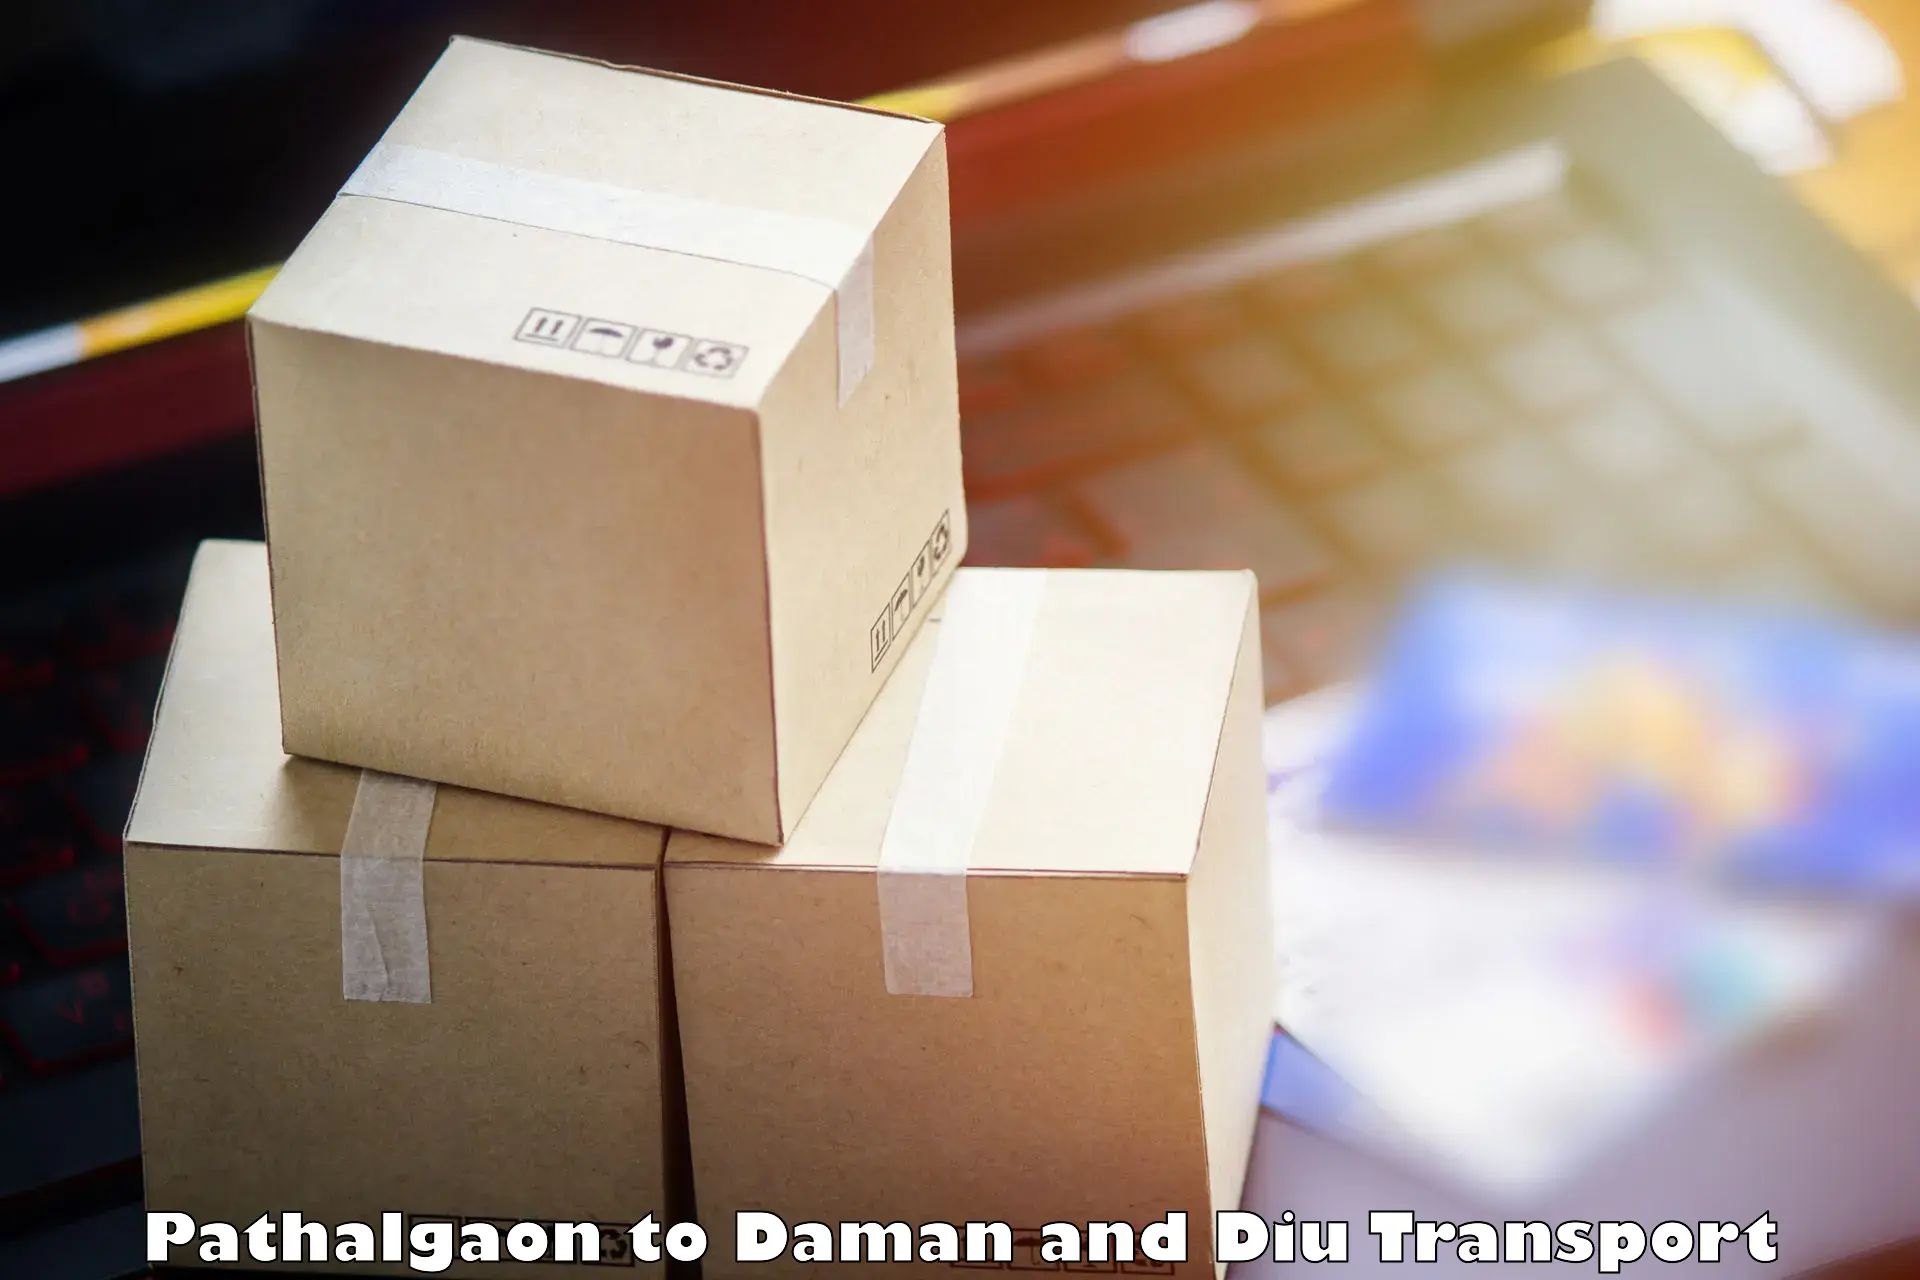 Container transport service in Pathalgaon to Daman and Diu